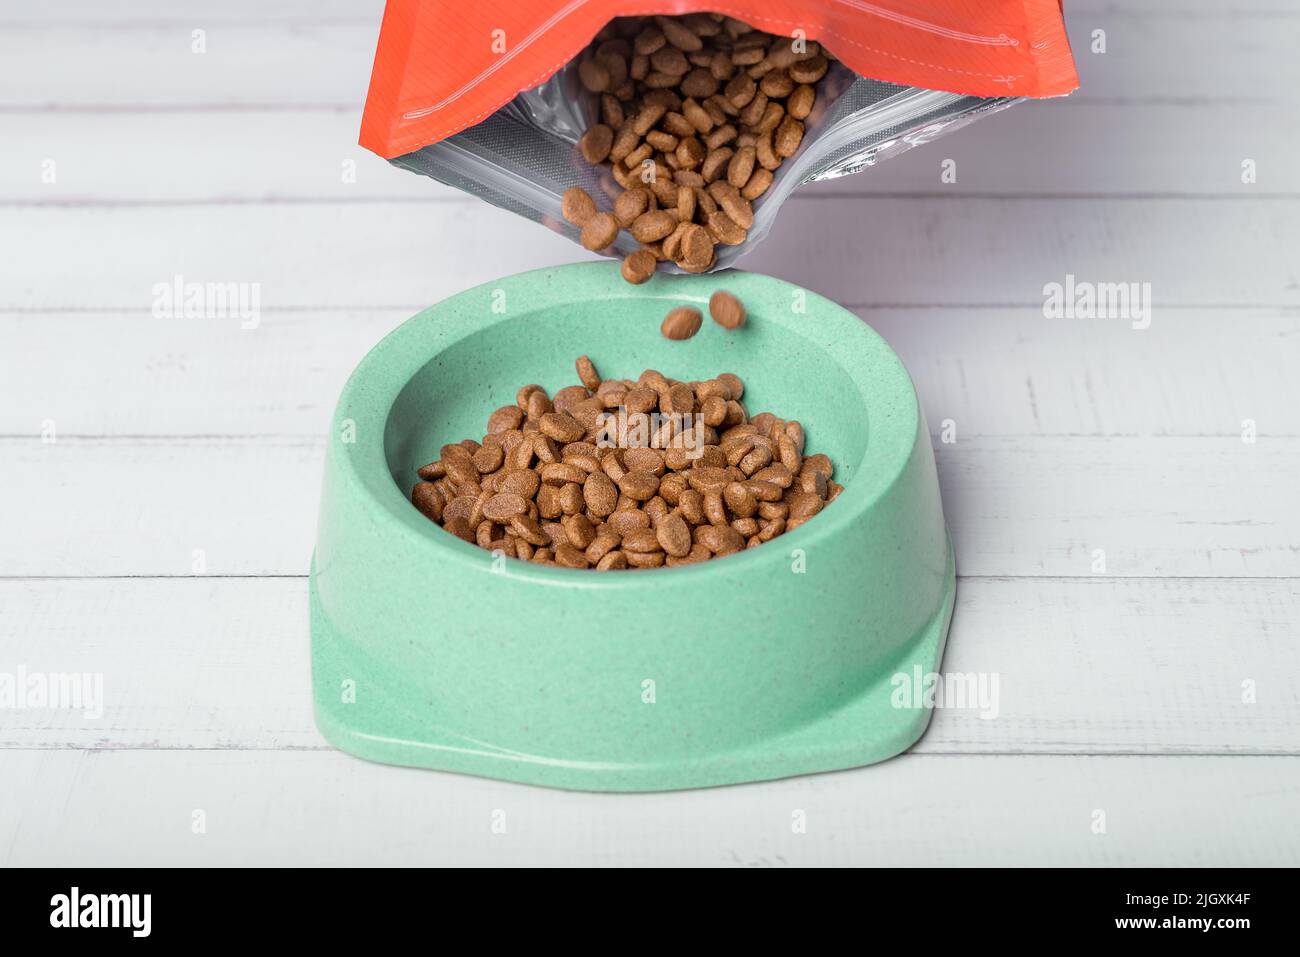 Pouring pet food into a bowl on the floor. Close-up. Stock Photo